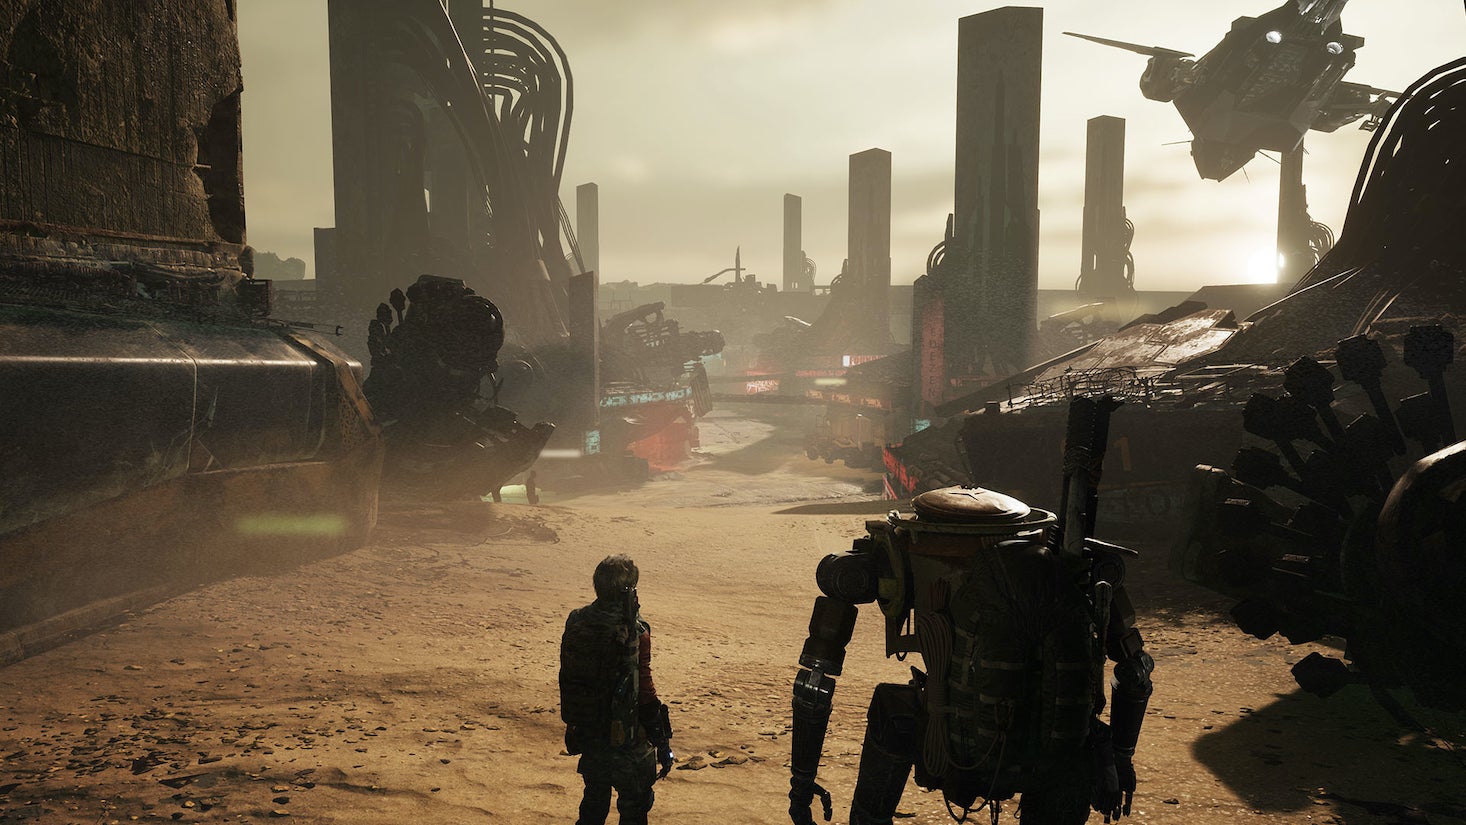 A man and a chunky robot stand together and look out over a sandy landscape in Miasma Chronicles